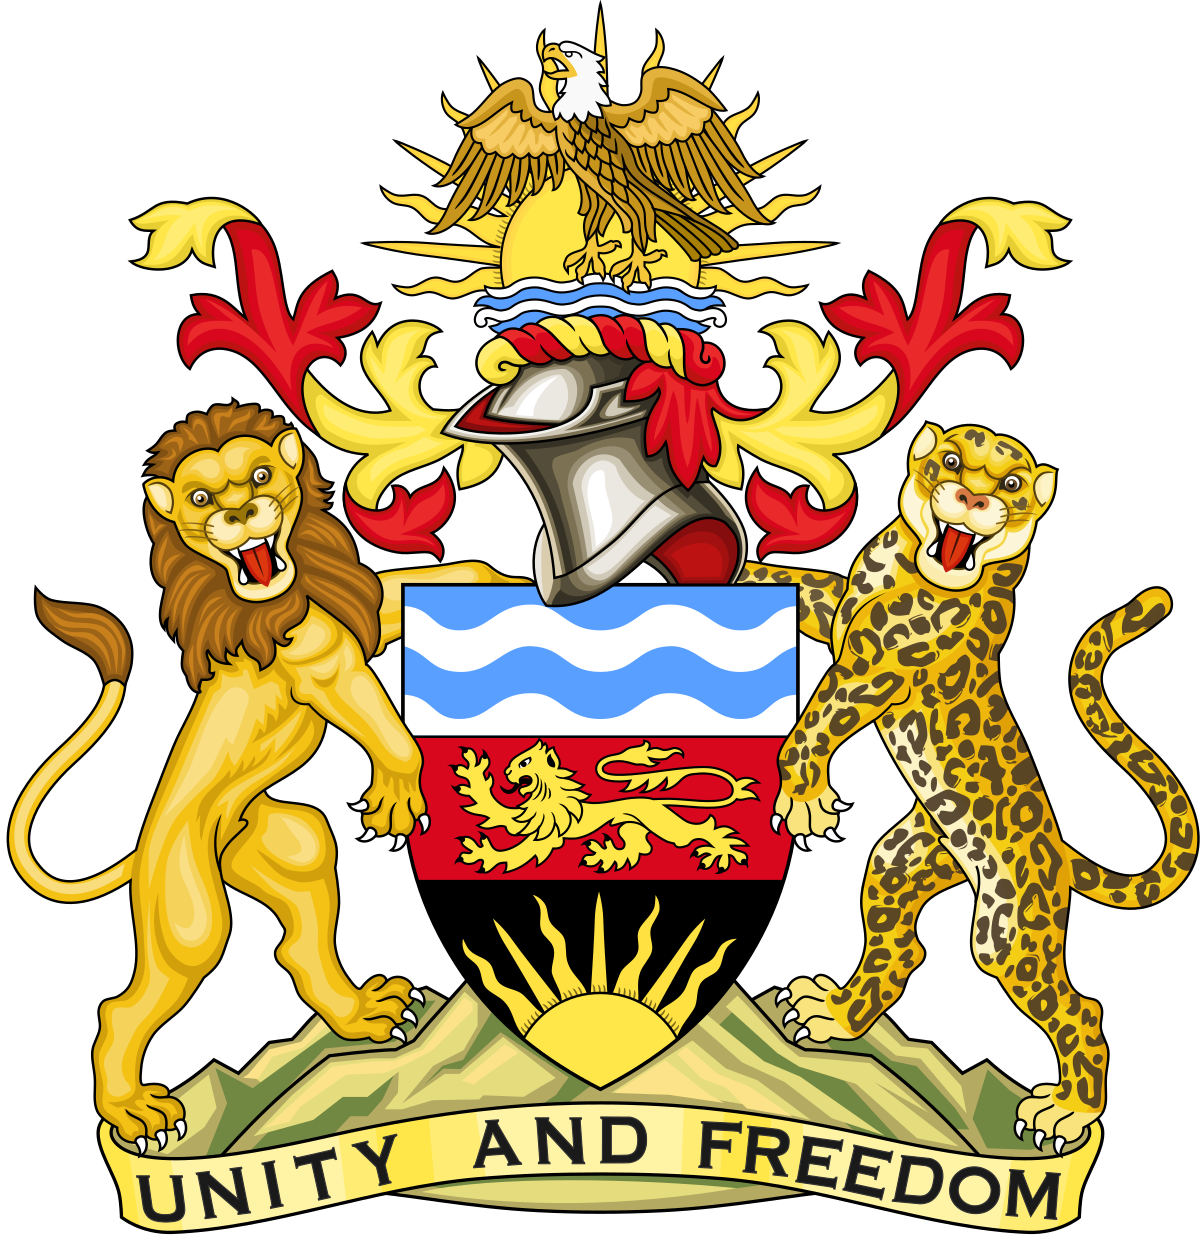 A Coat Of Arms With Lions And A Bird